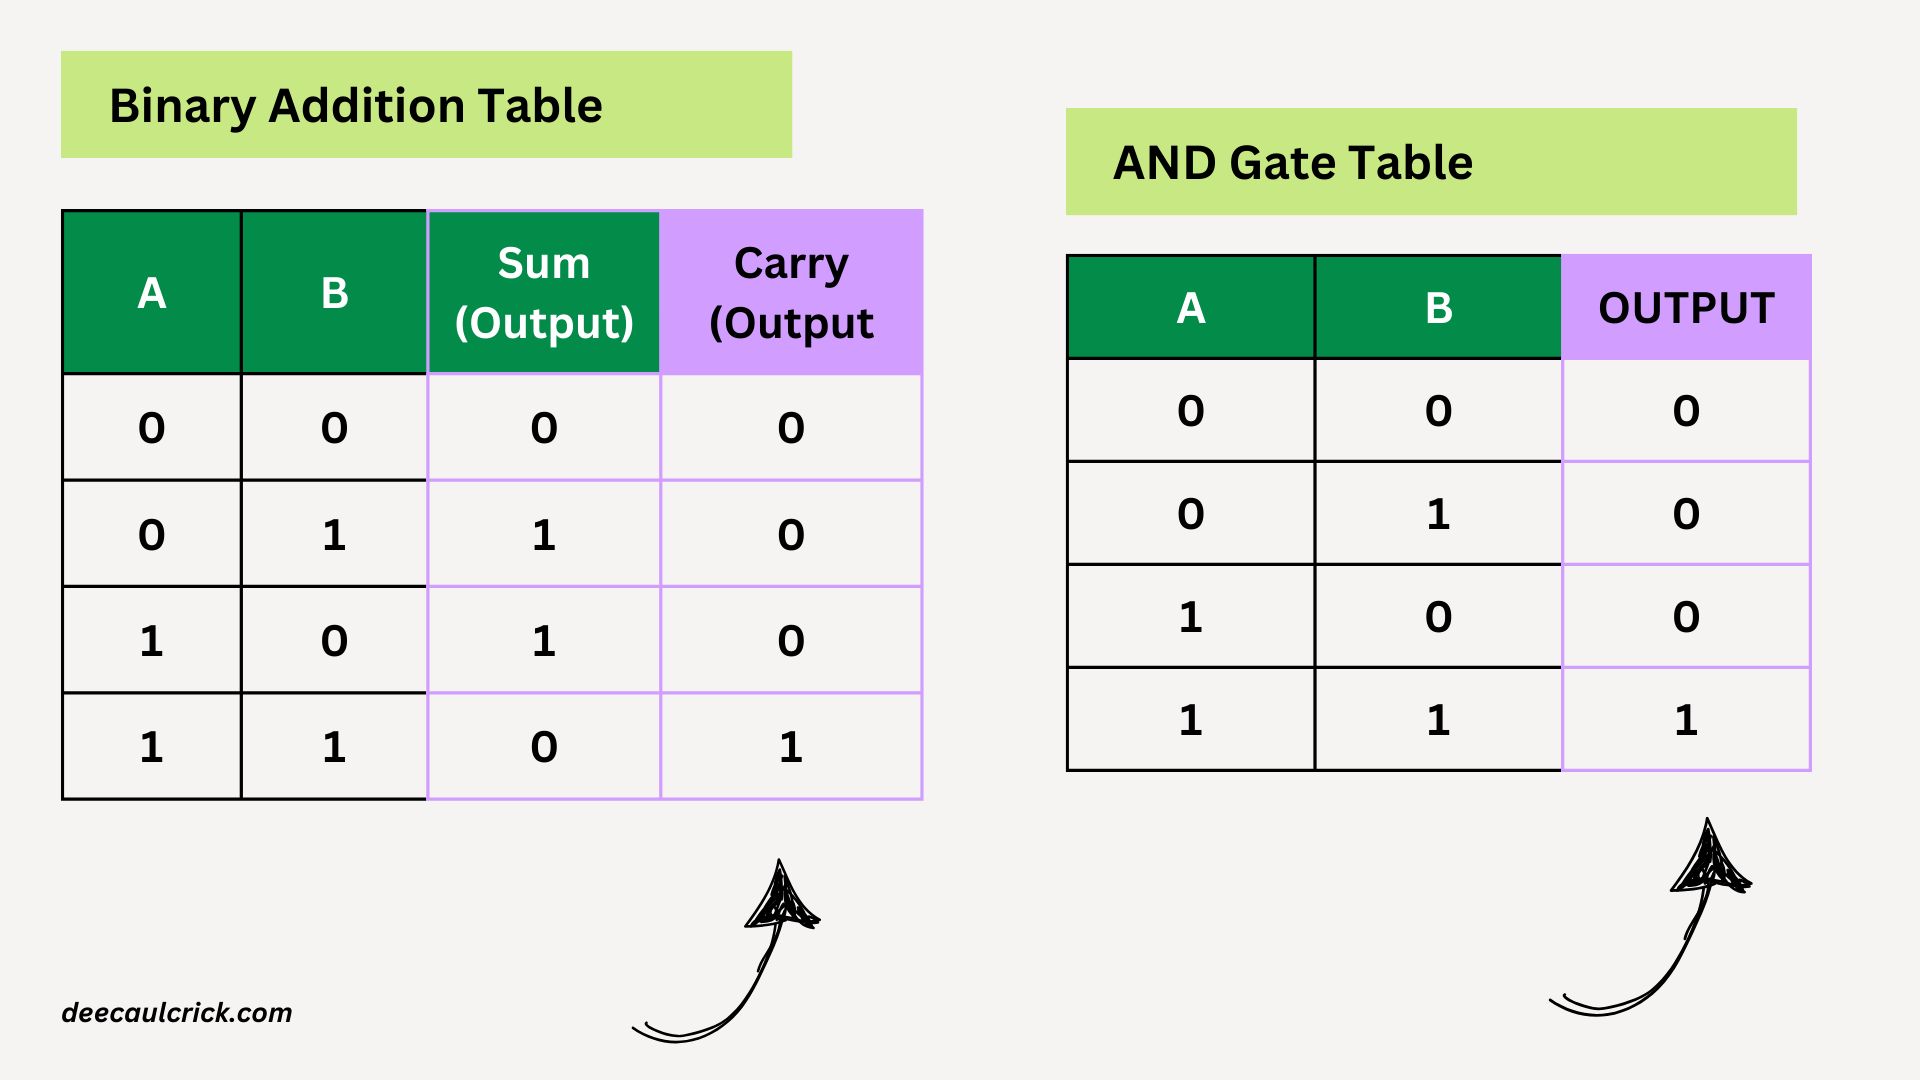 Comparison between Carry Output and AND gate